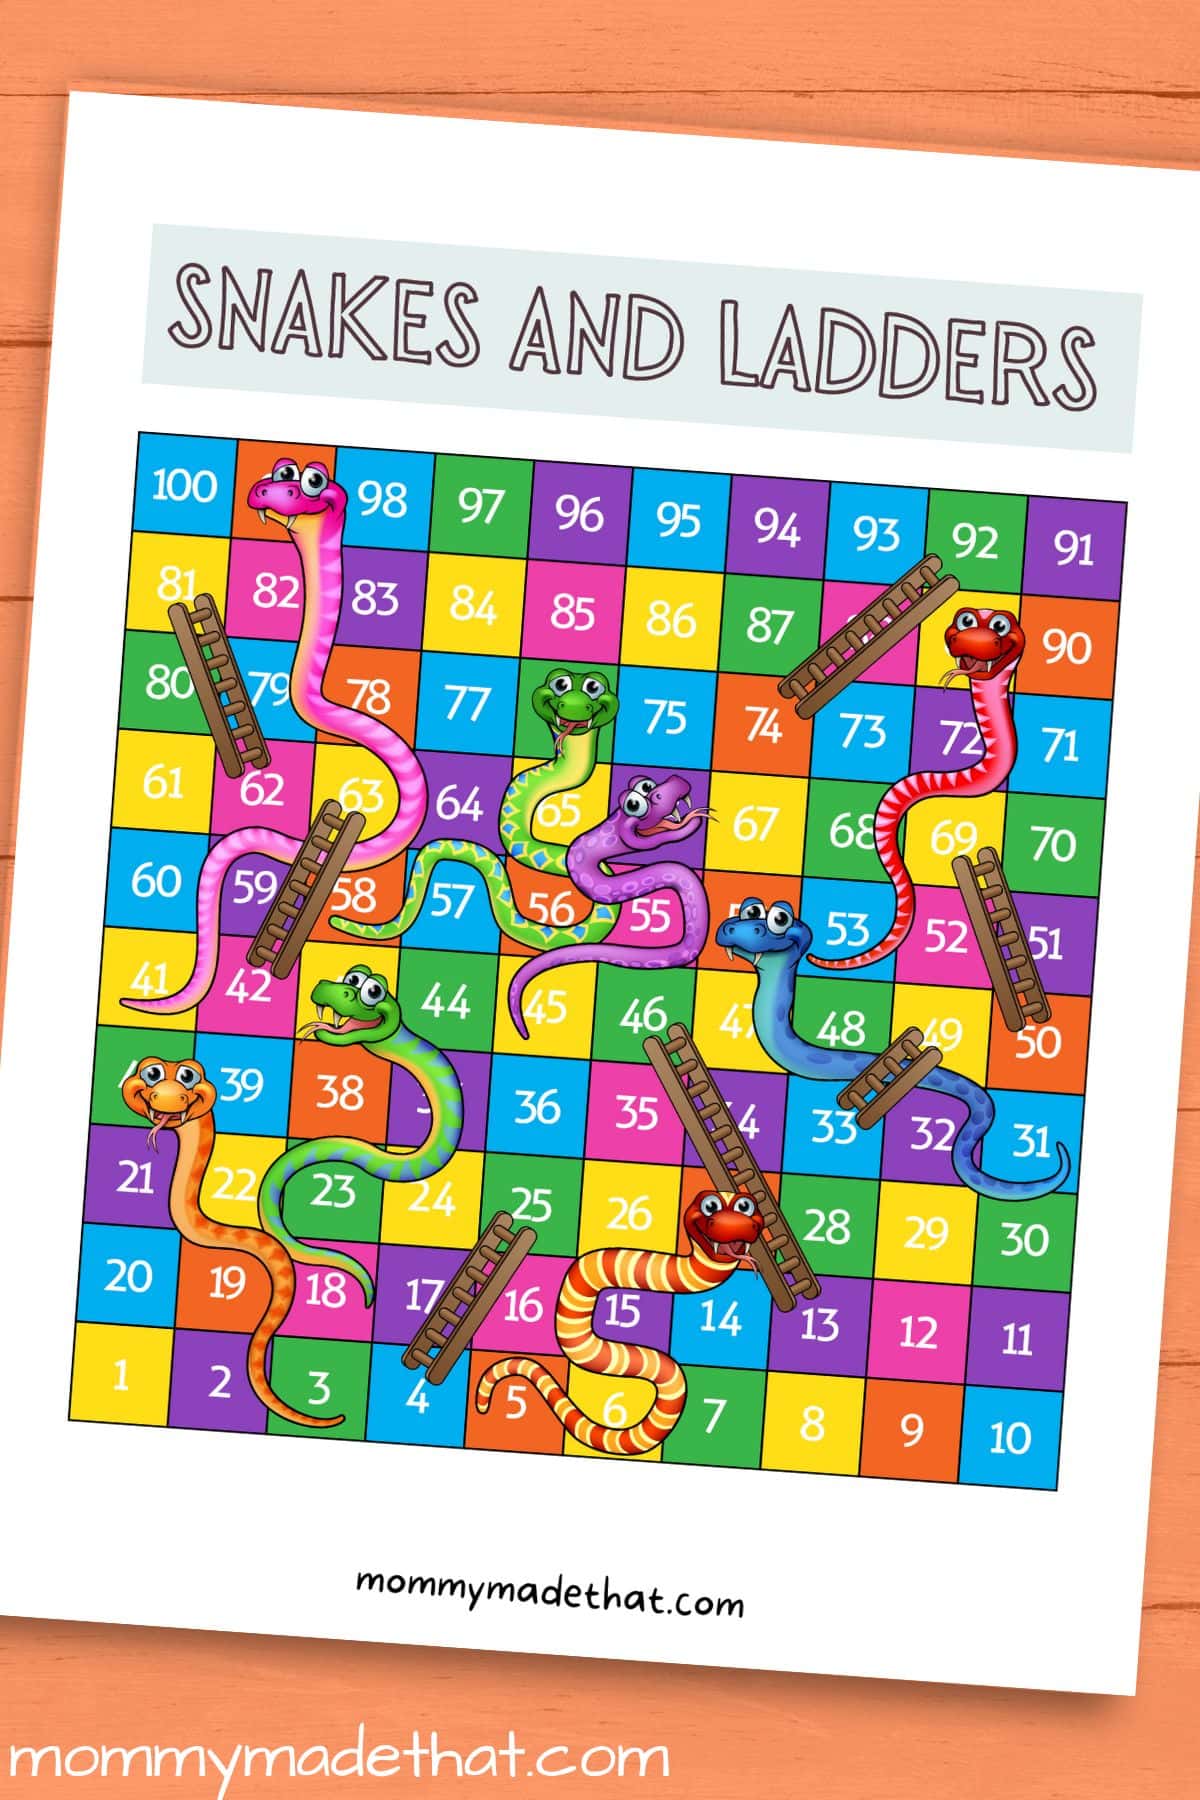 Snakes and ladders printable game board free template